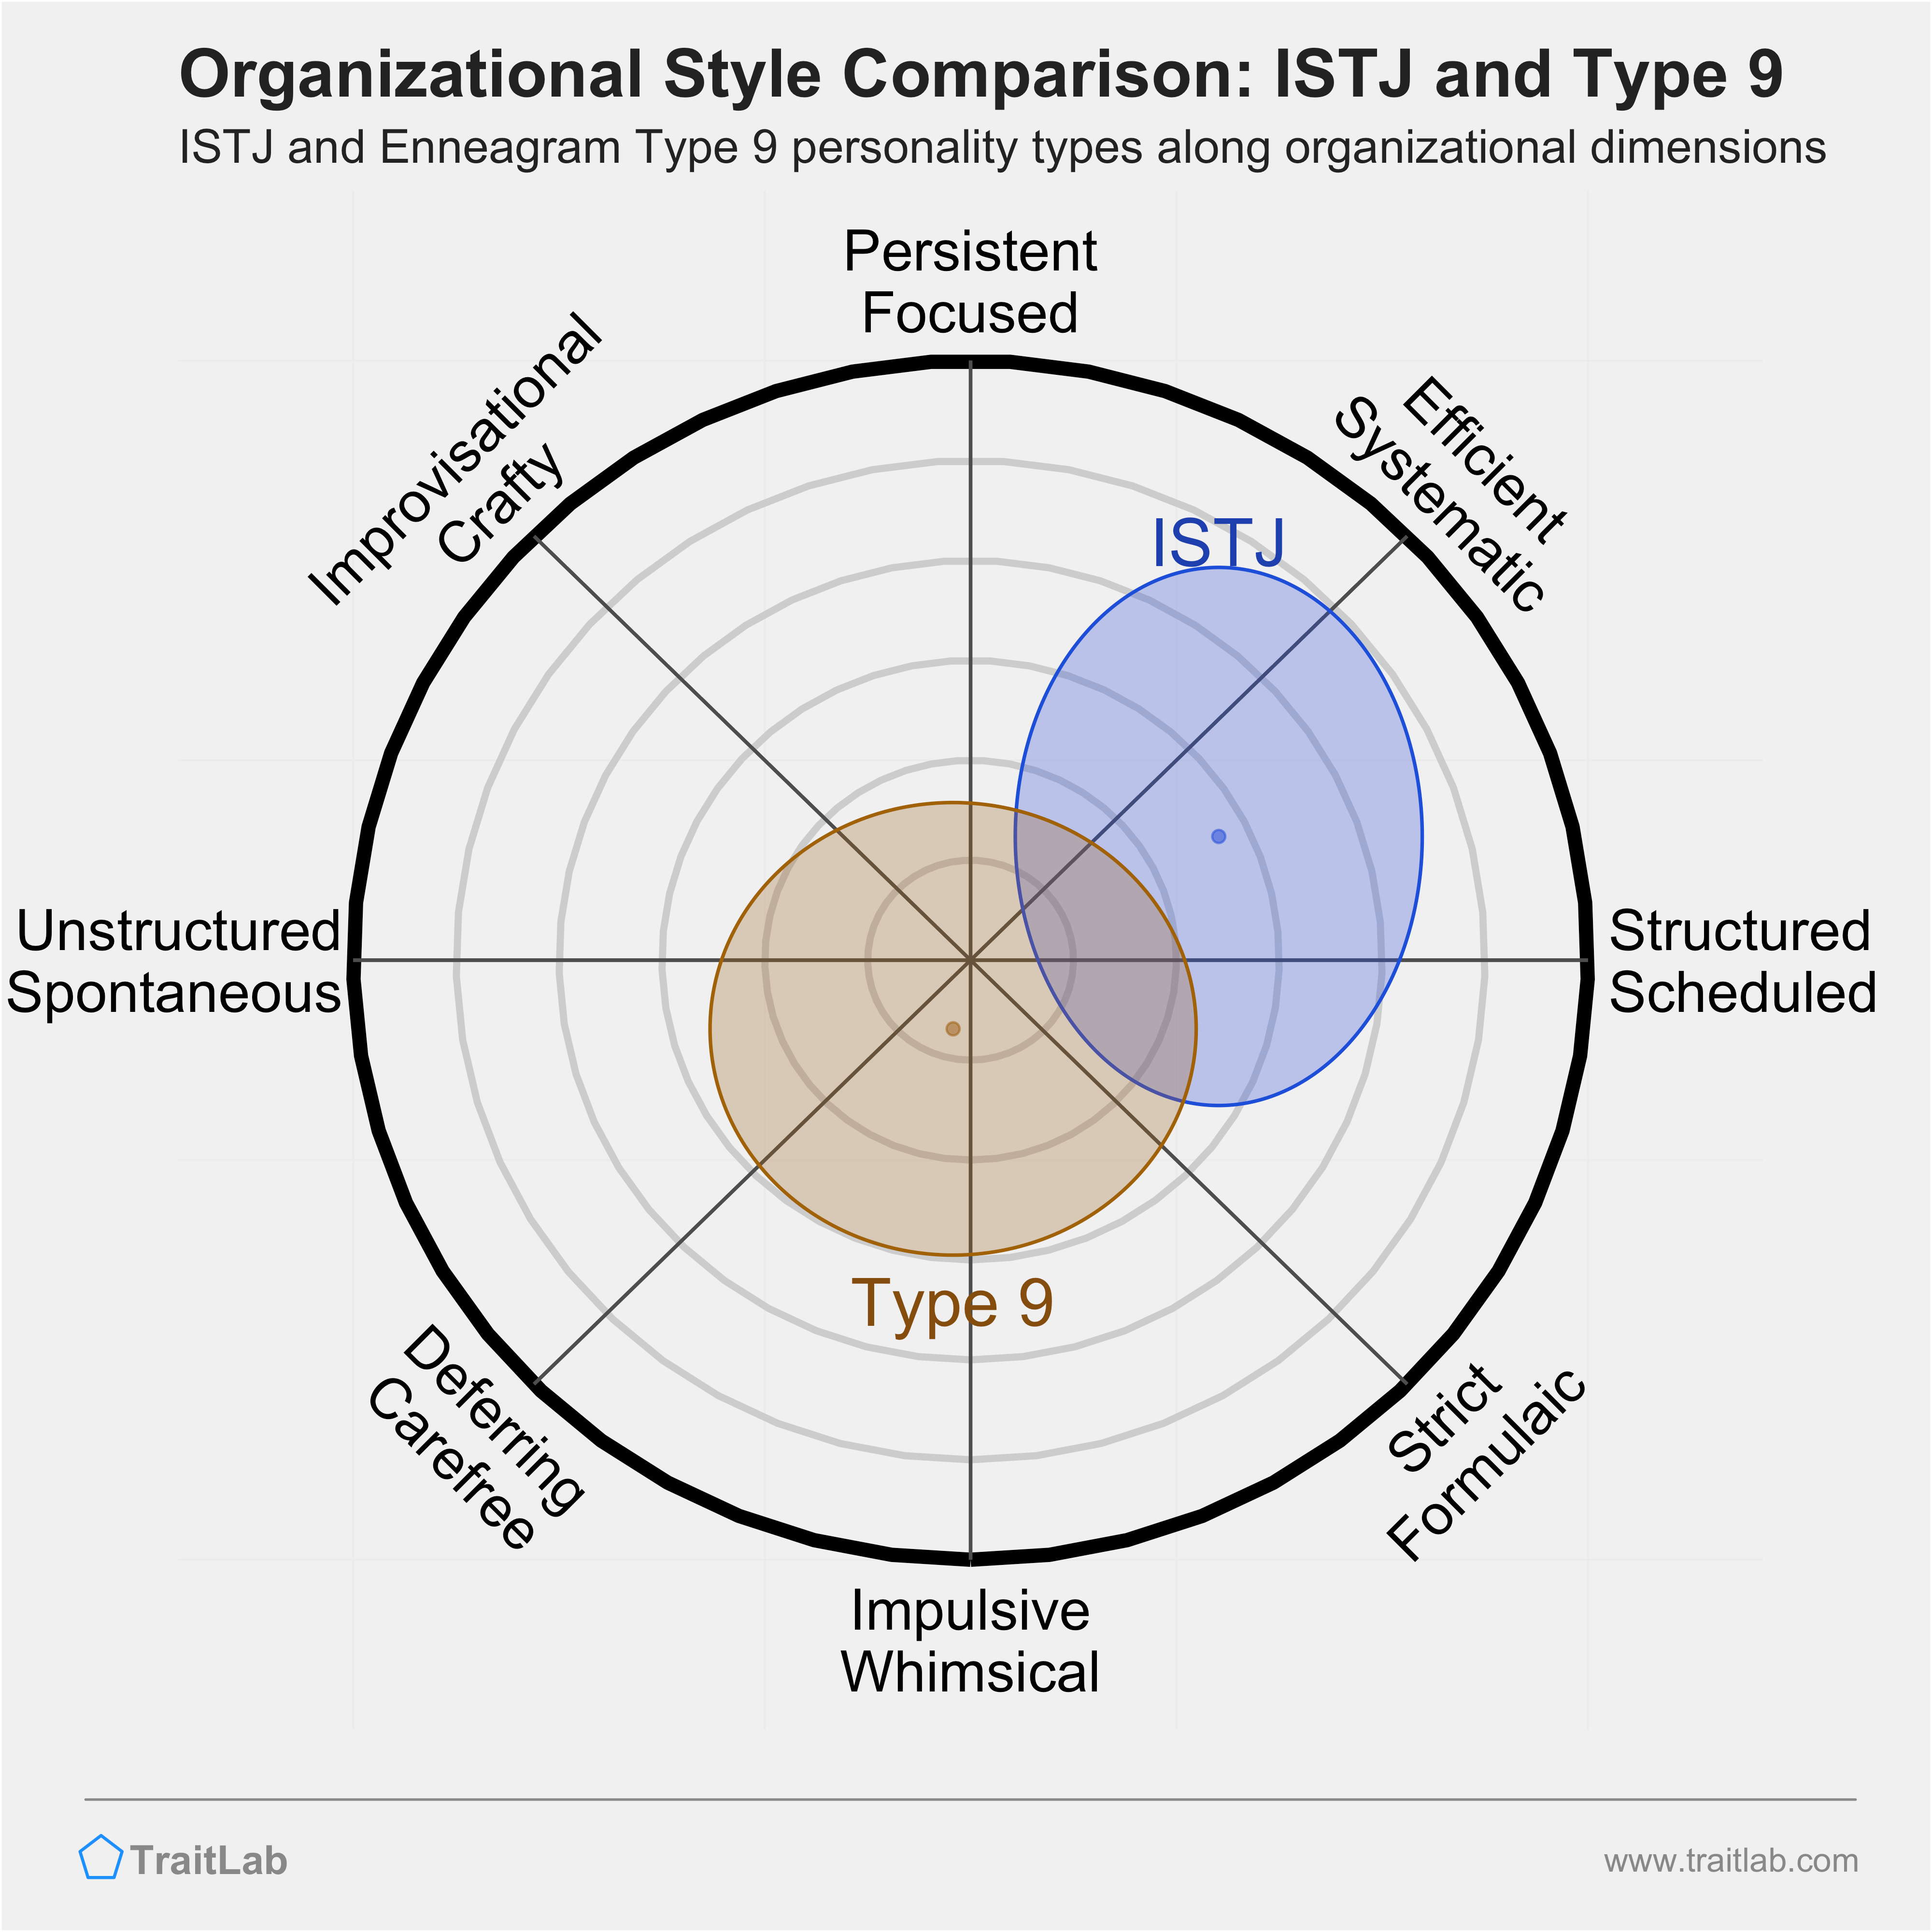 ISTJ and Type 9 comparison across organizational dimensions